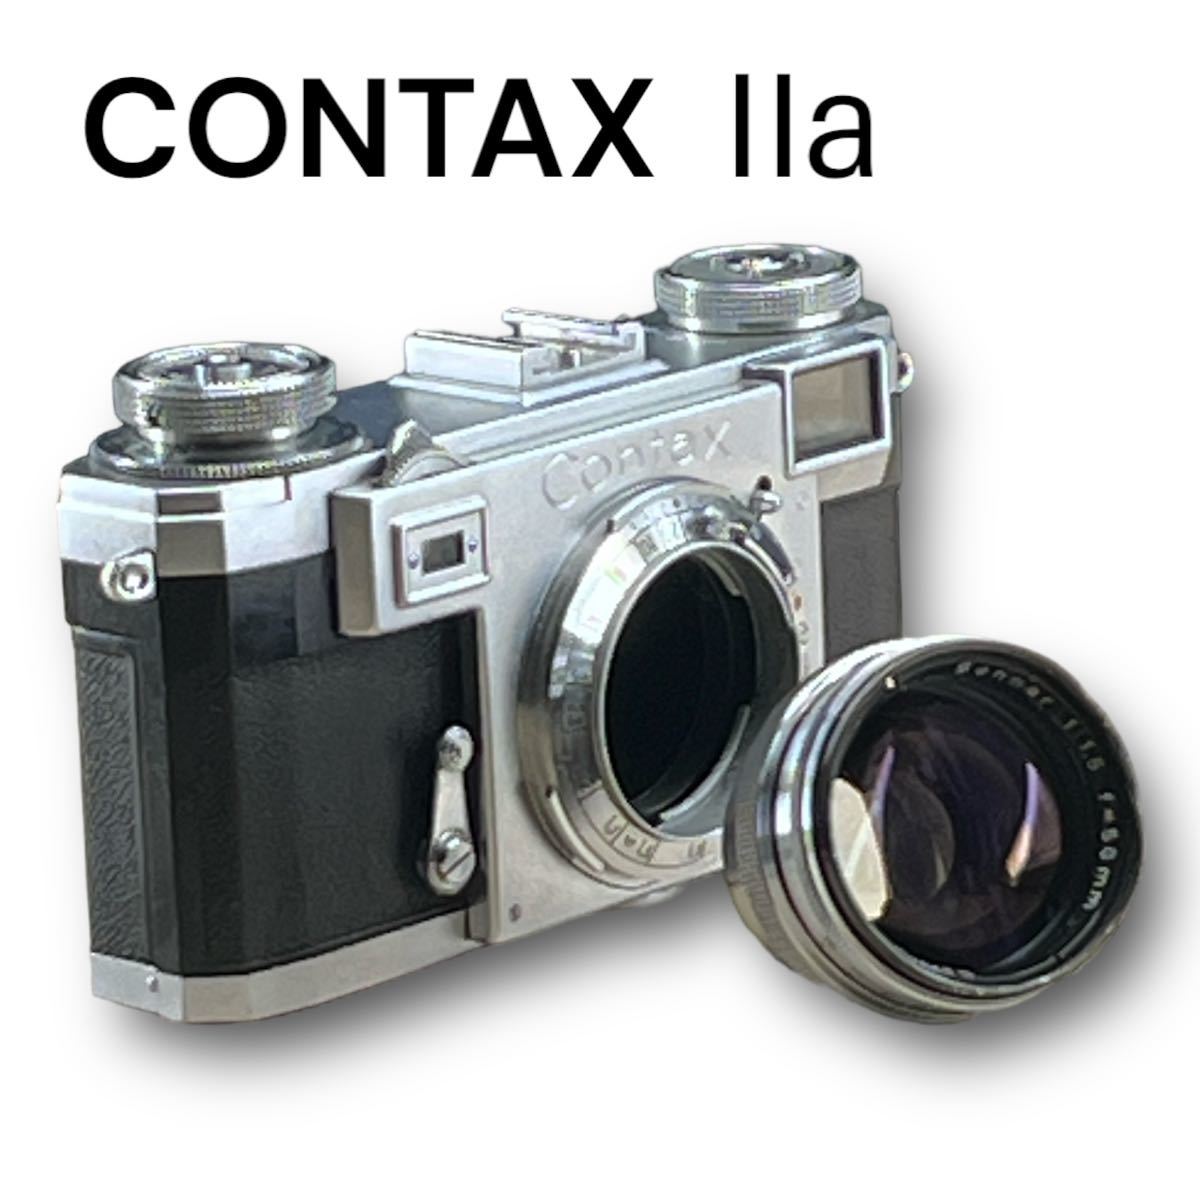 【Zeiss レンズ付属】コンタックス CONTAX 2a IIa おまけのレンズZeiss-Opton Sonnar 50mm F1.5付き_画像6